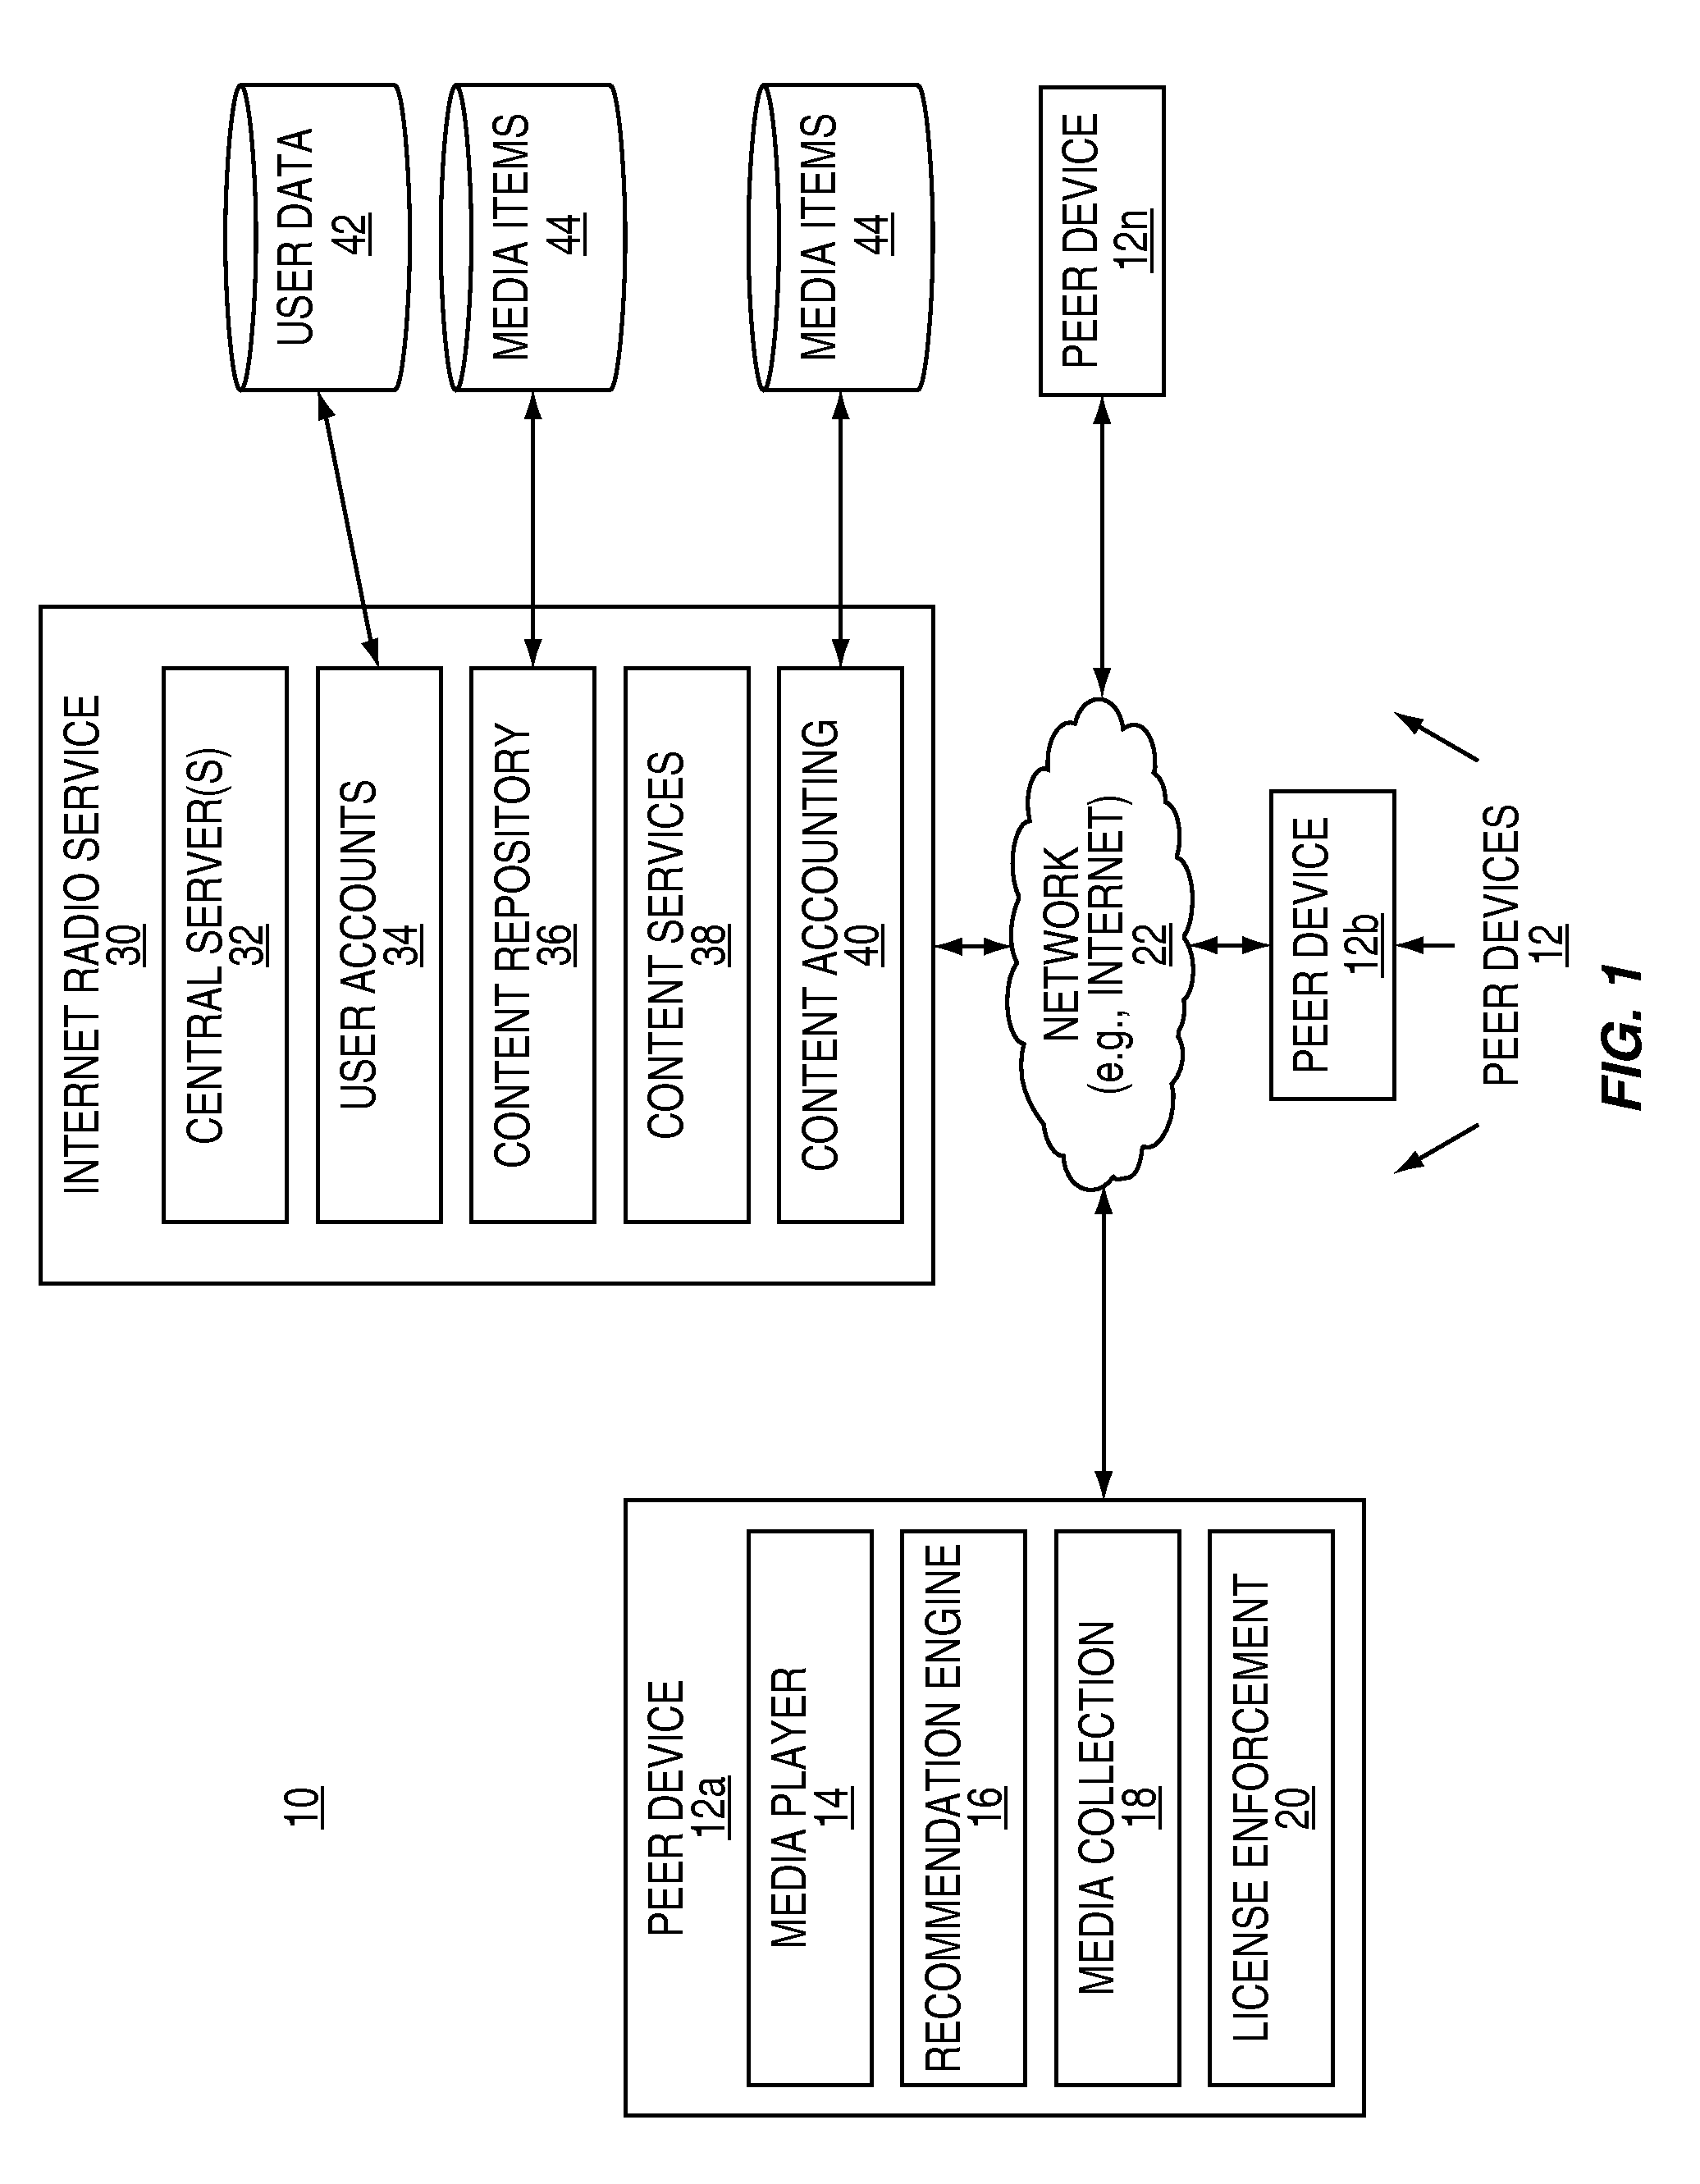 Method and system for populating a content repository for an internet radio service based on a recommendation network